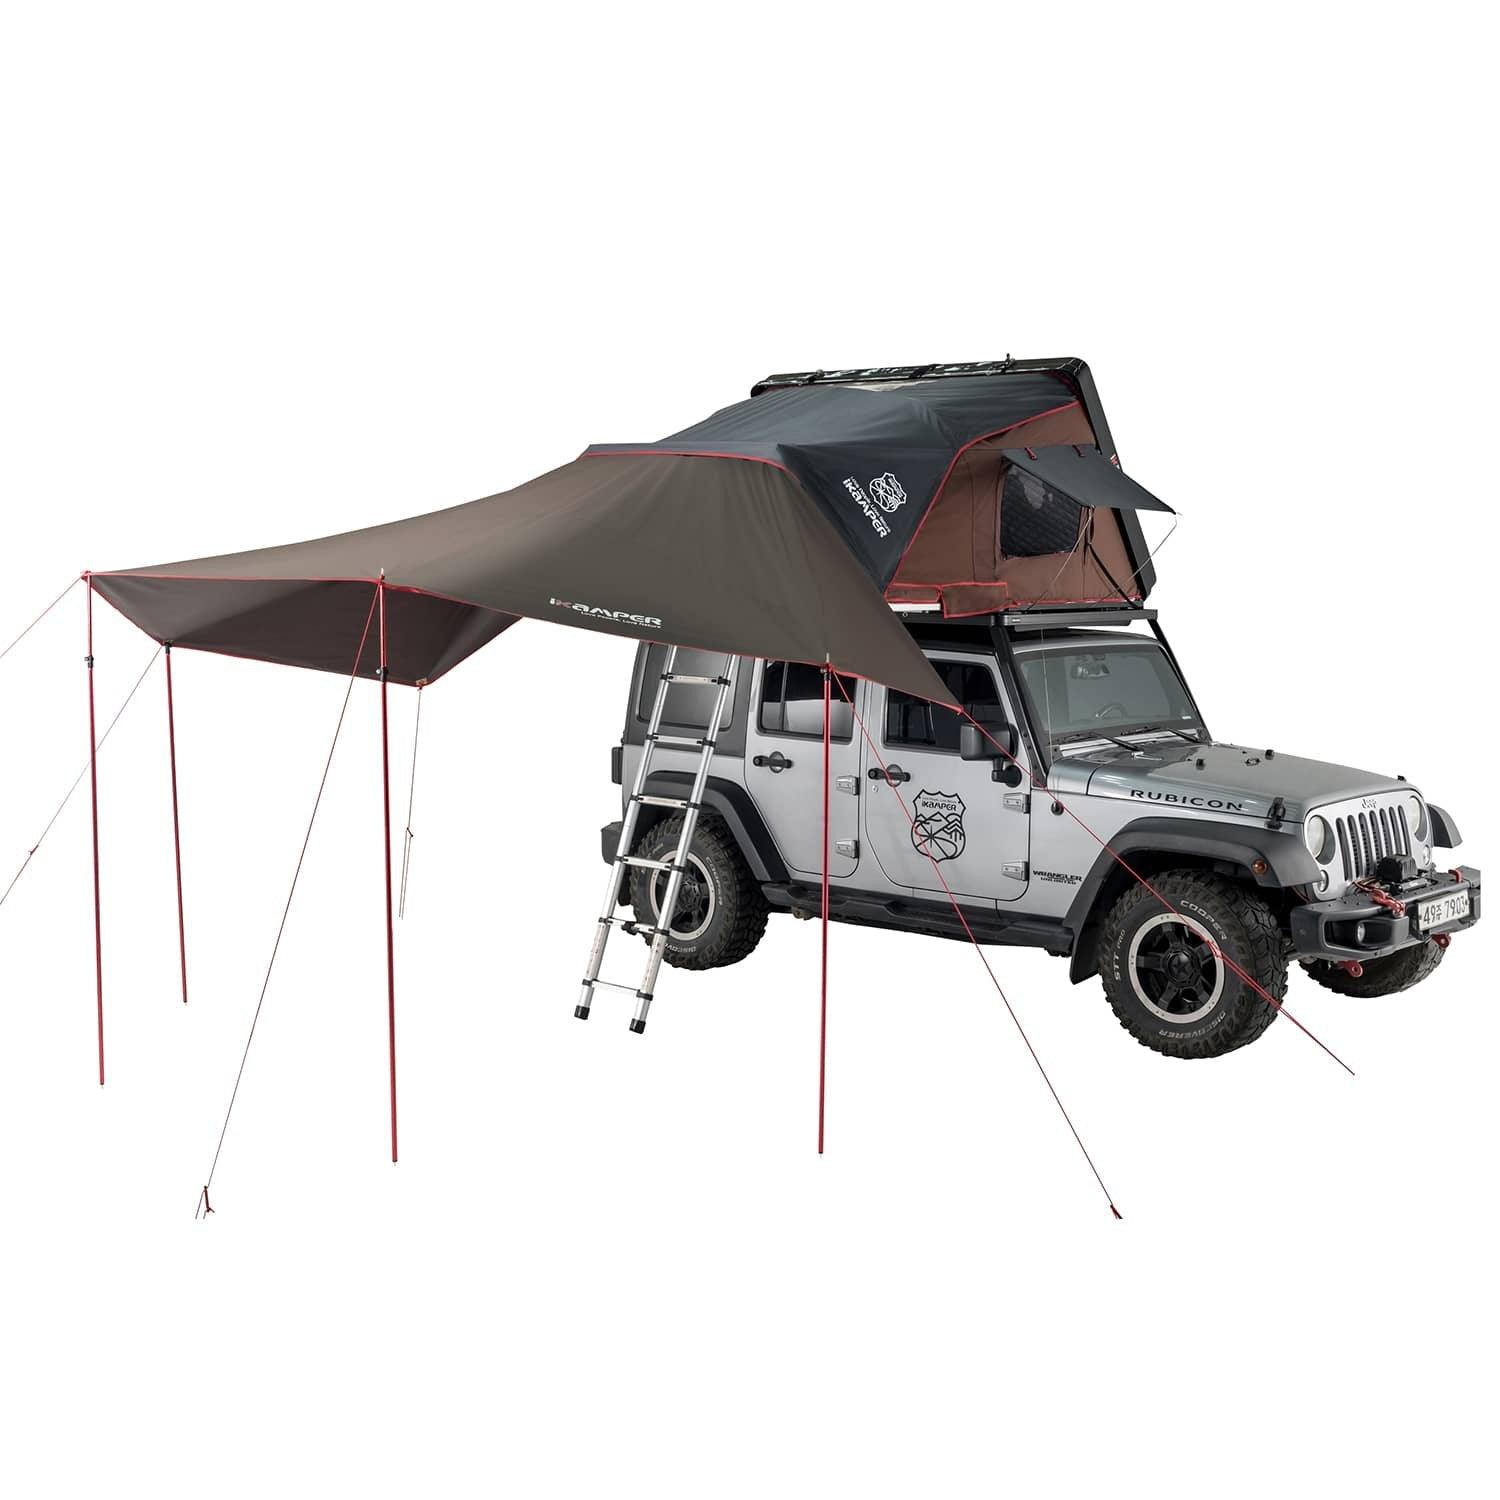 Awnings For Sale Online - Free Shipping - Off Road Tents